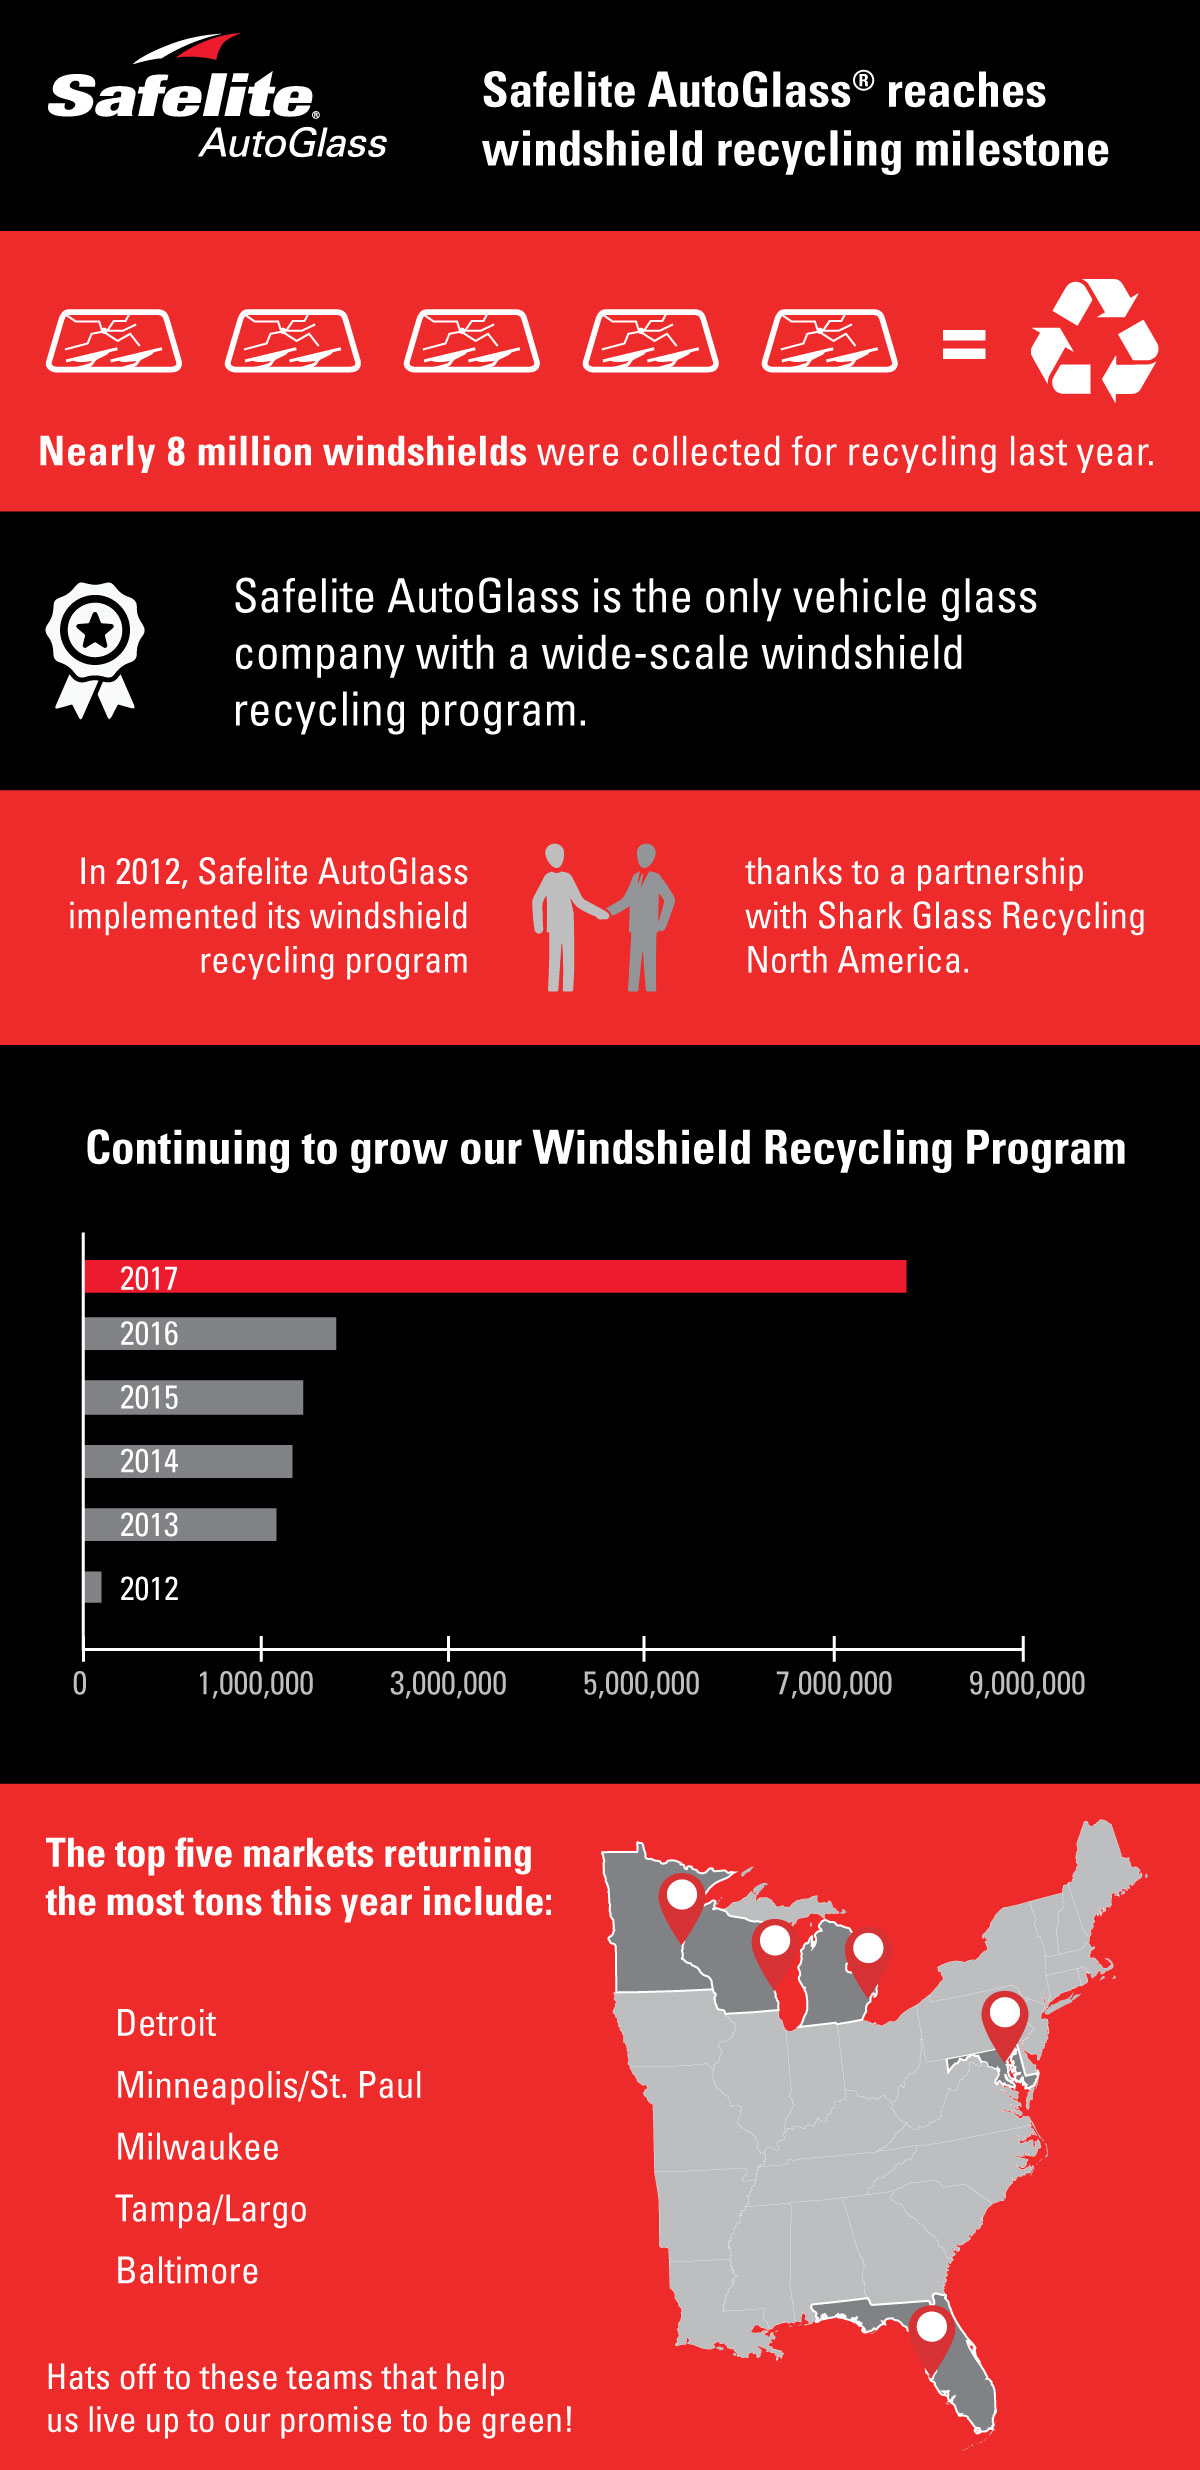 In 2017, Safelite recycled a record number of windshields. 